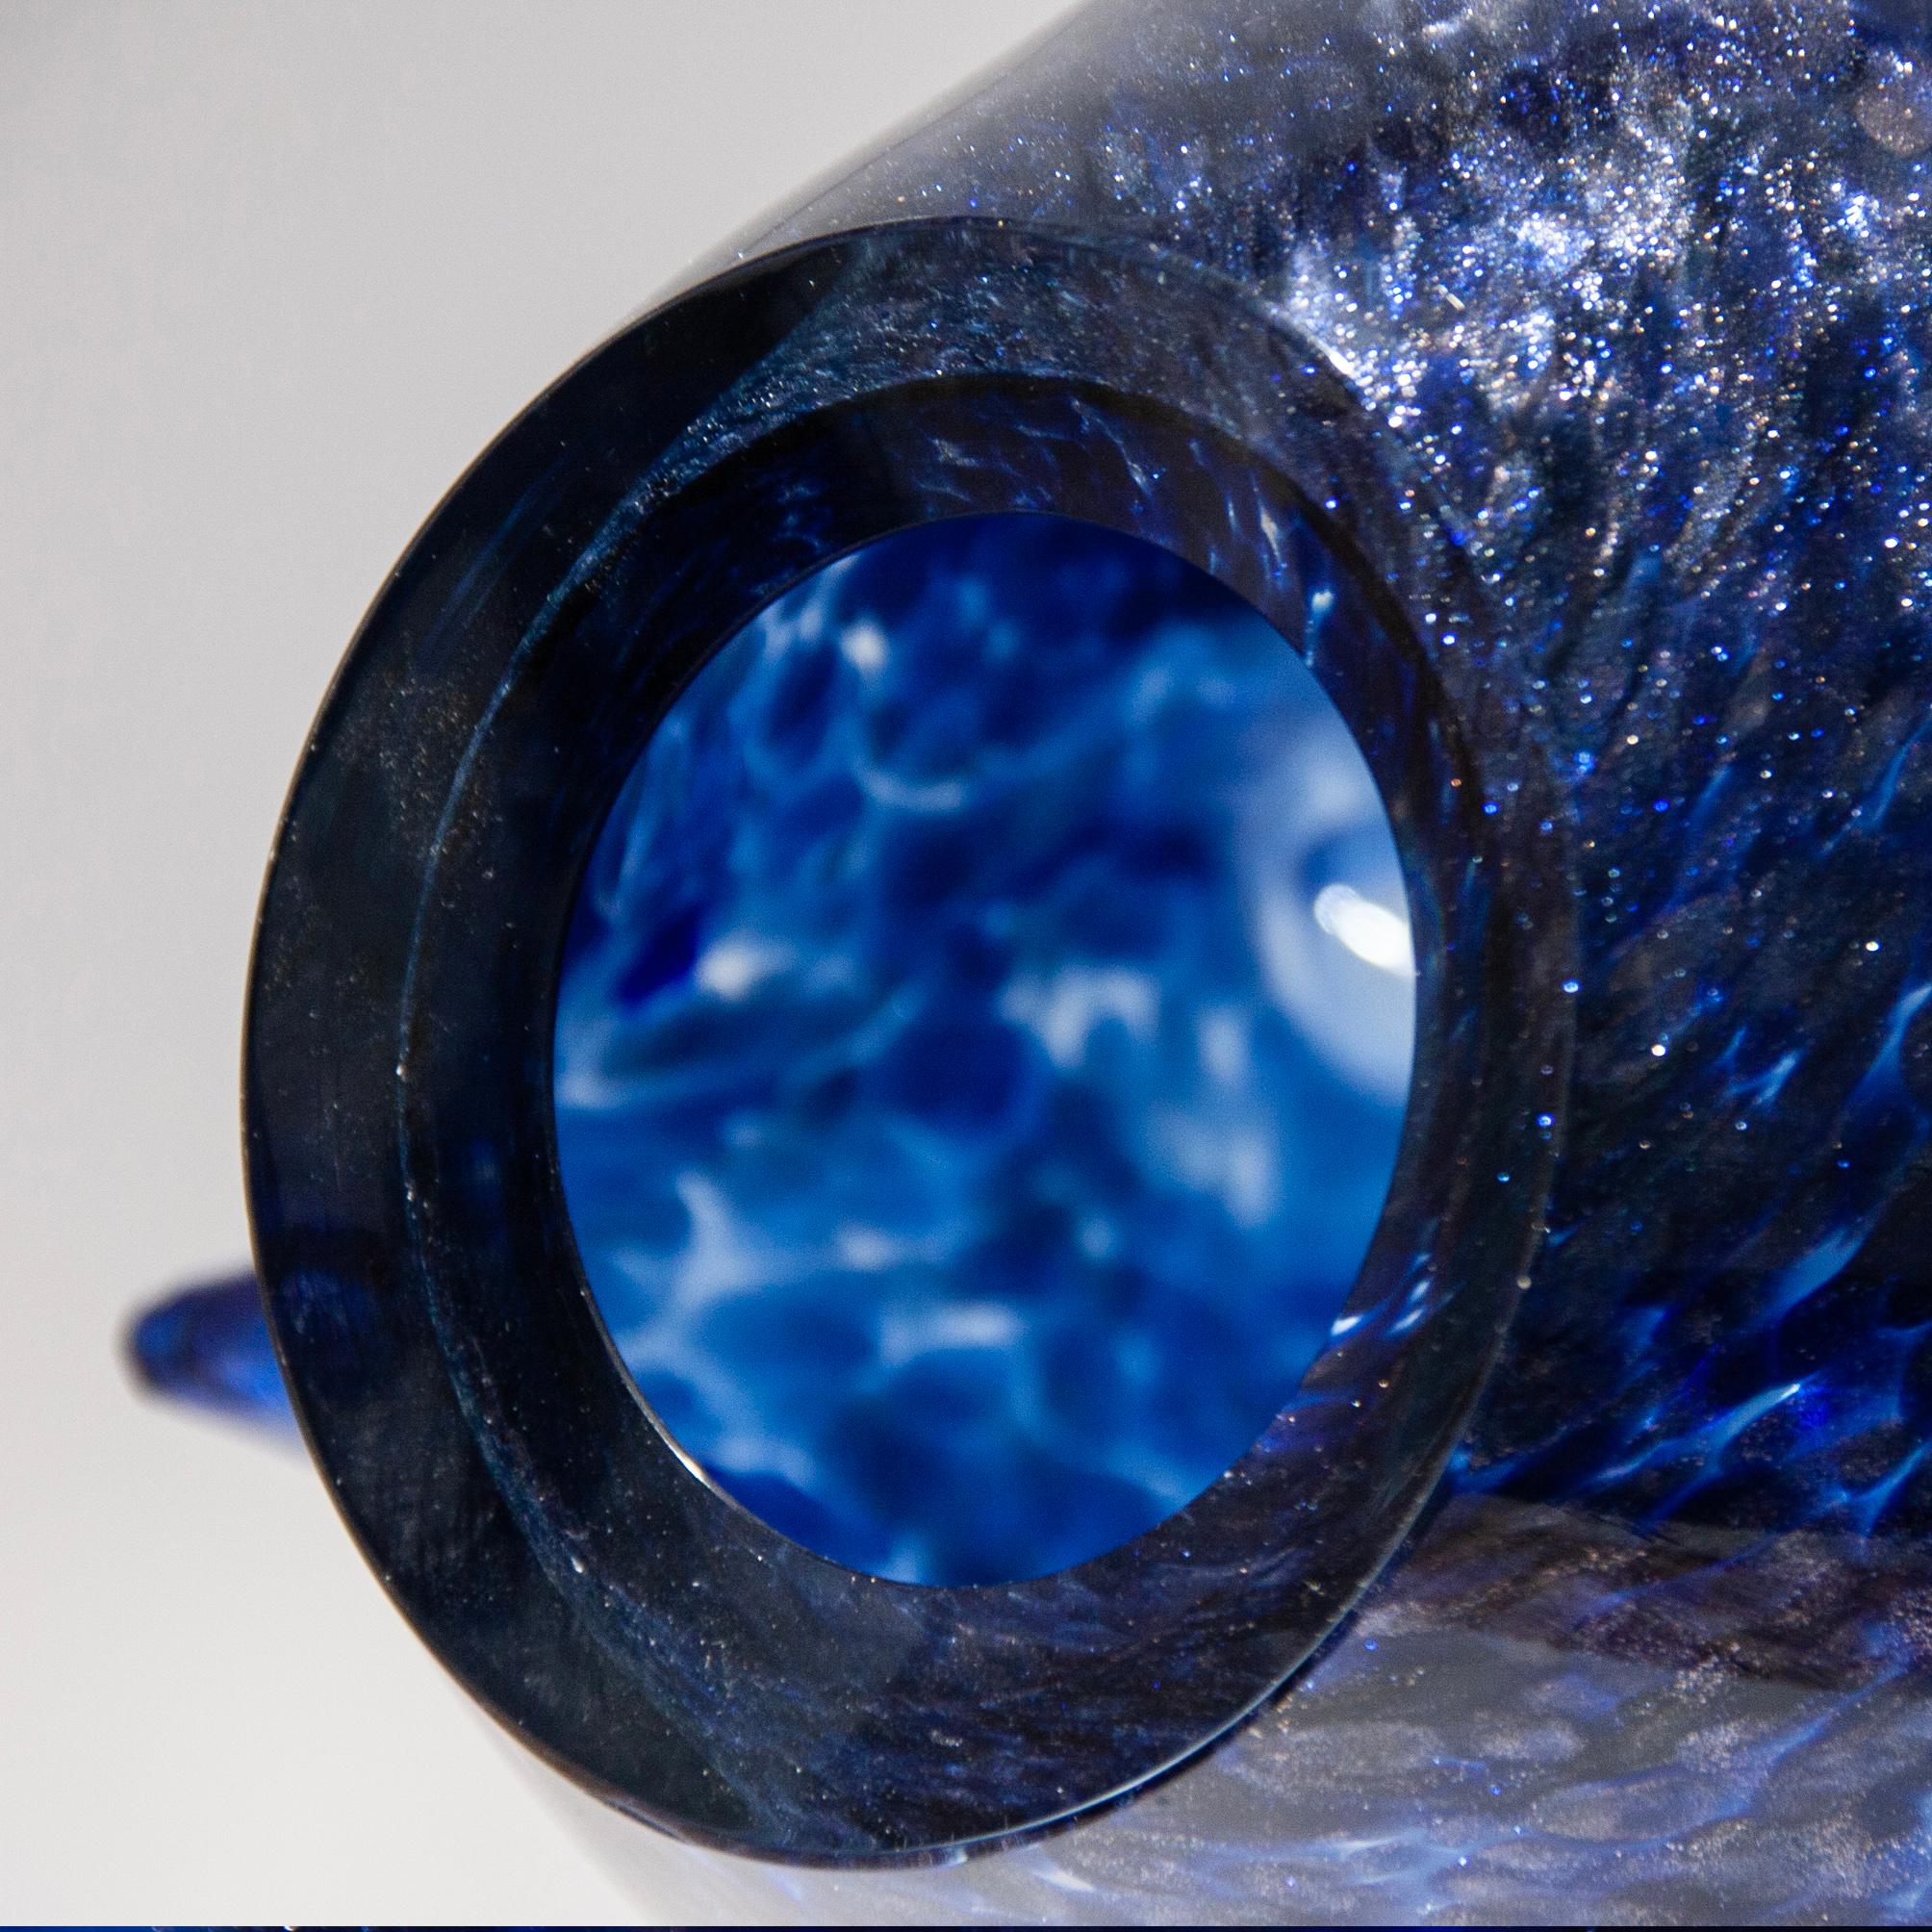 Blast is a collection without a defined boundary, where the energy enclosed in a mass of incandescent glass is immortalized at the moment of its explosion, like a supernova. The bright spines of the one-of-a-kind Nebulosa Vase sculpture in rare Blue